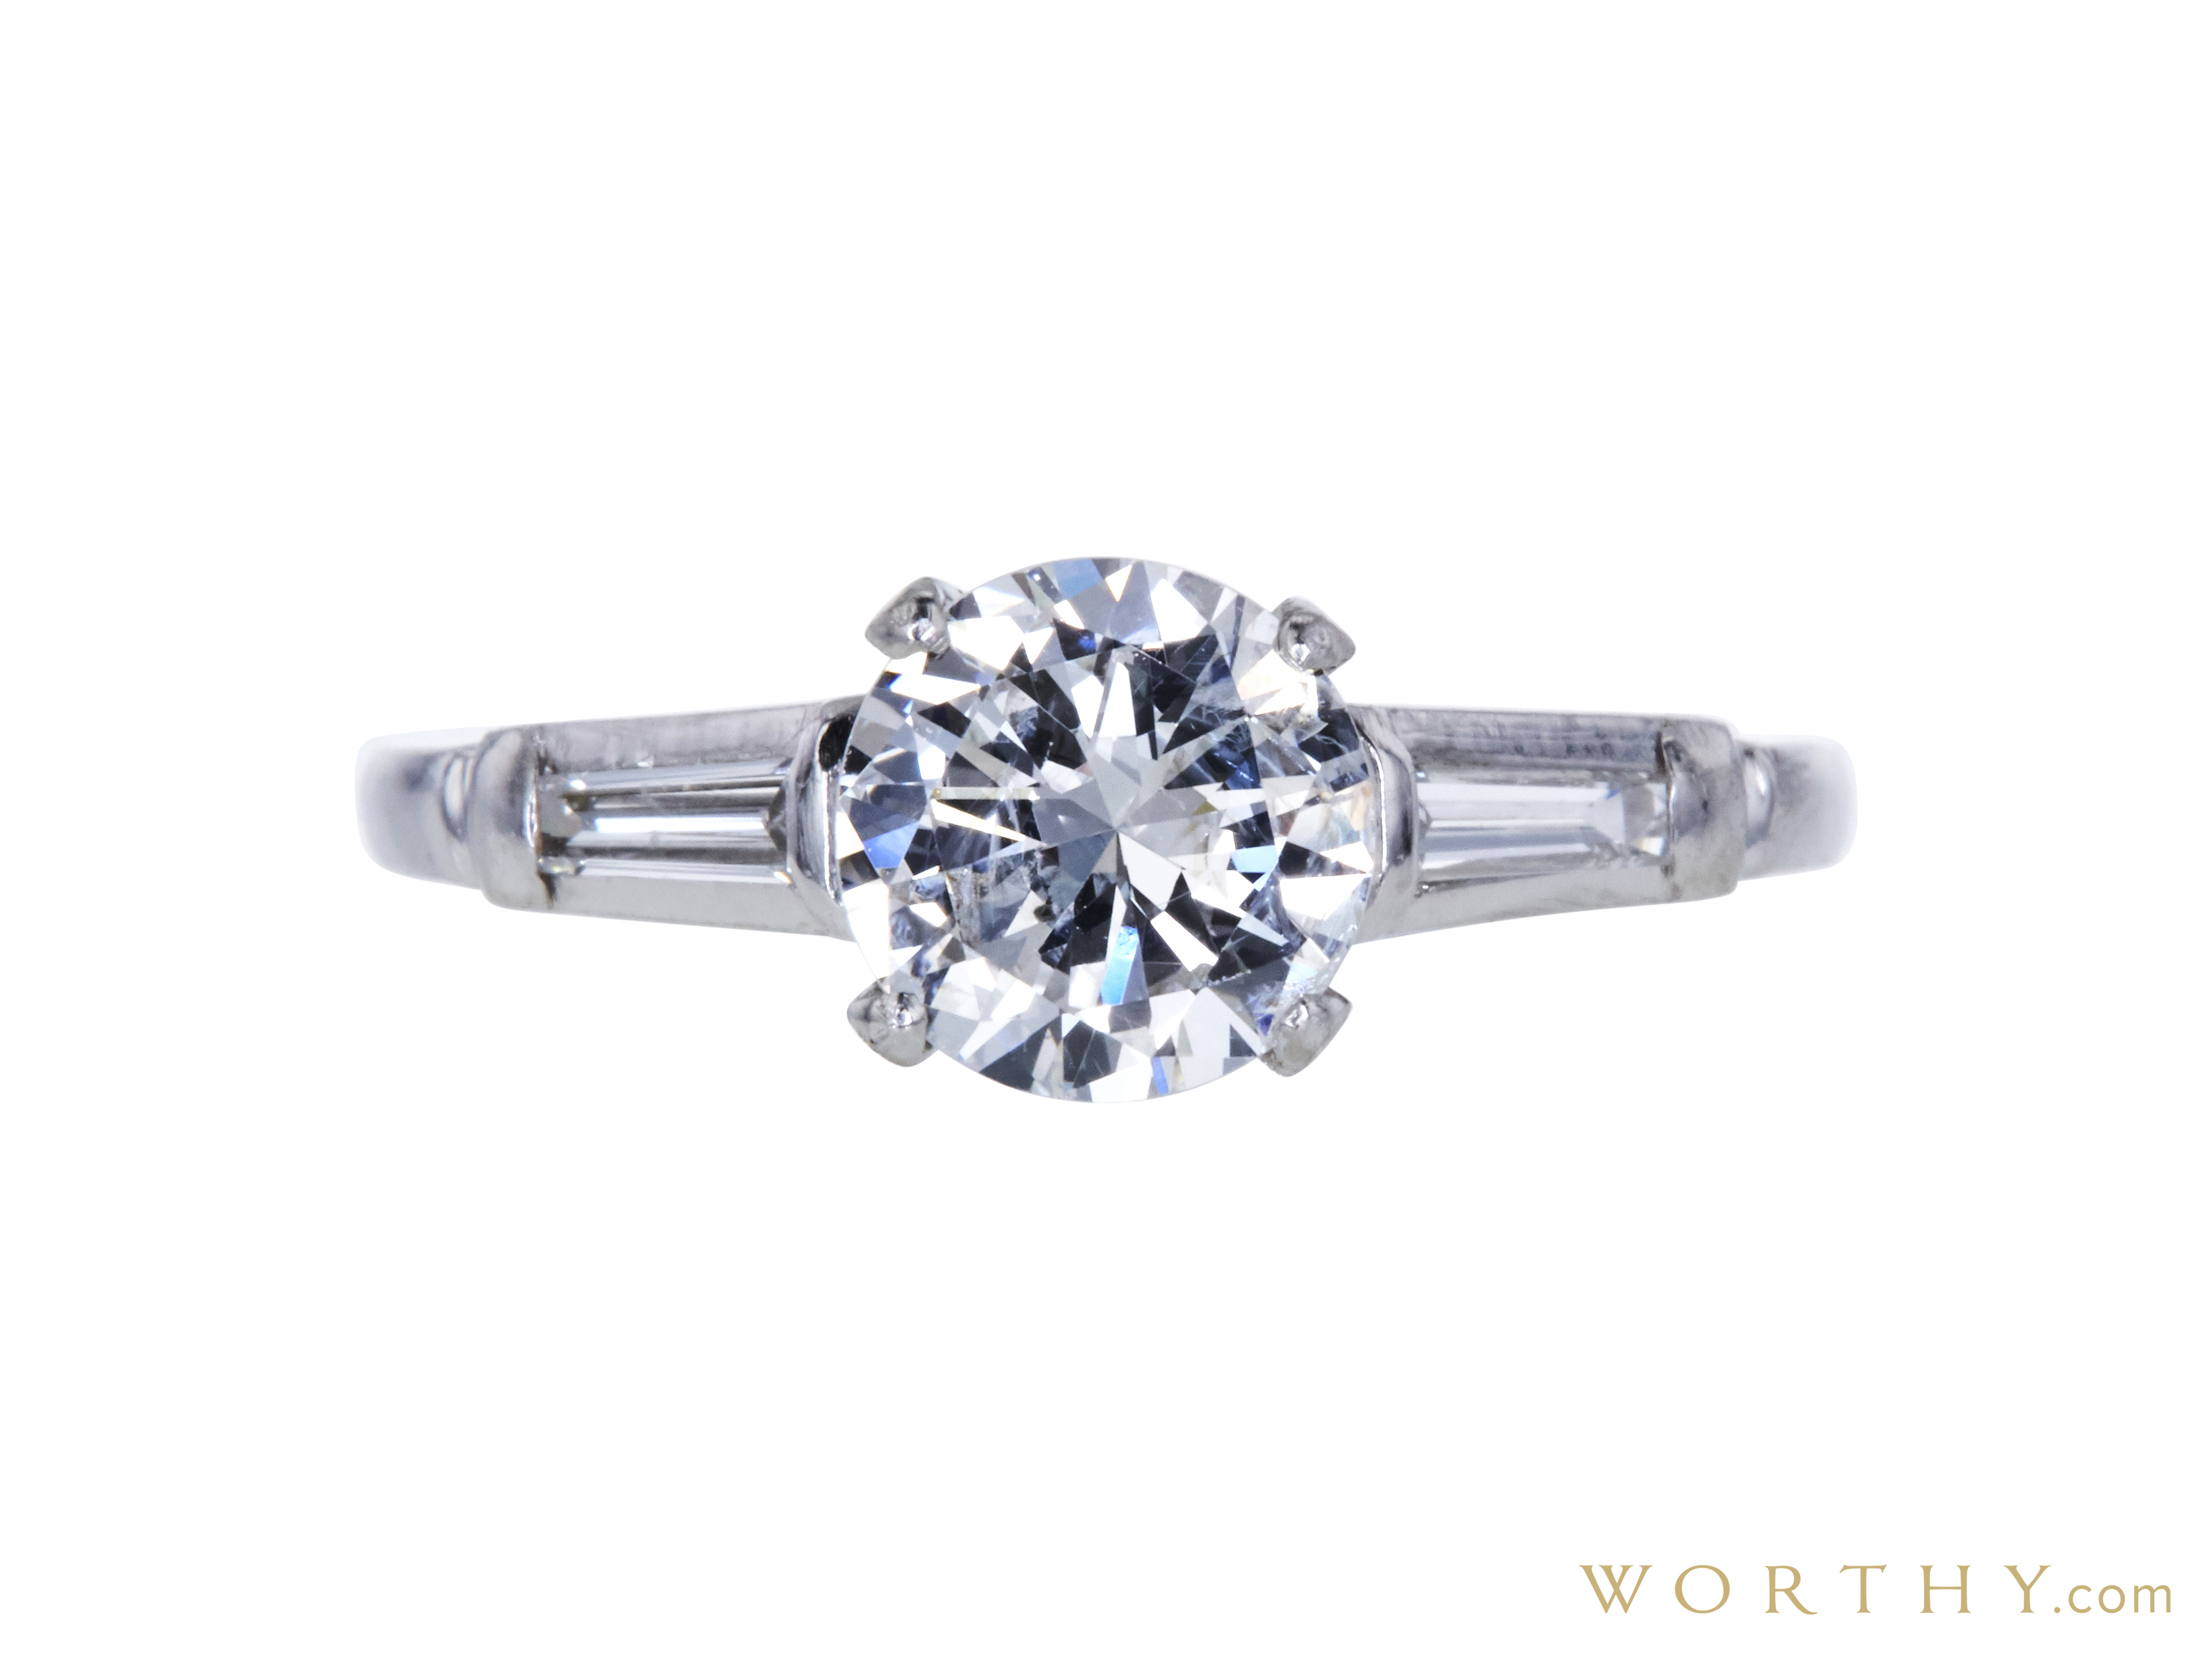 Sell Your Diamond (1.12 carat sold for $1,962) - Worthy